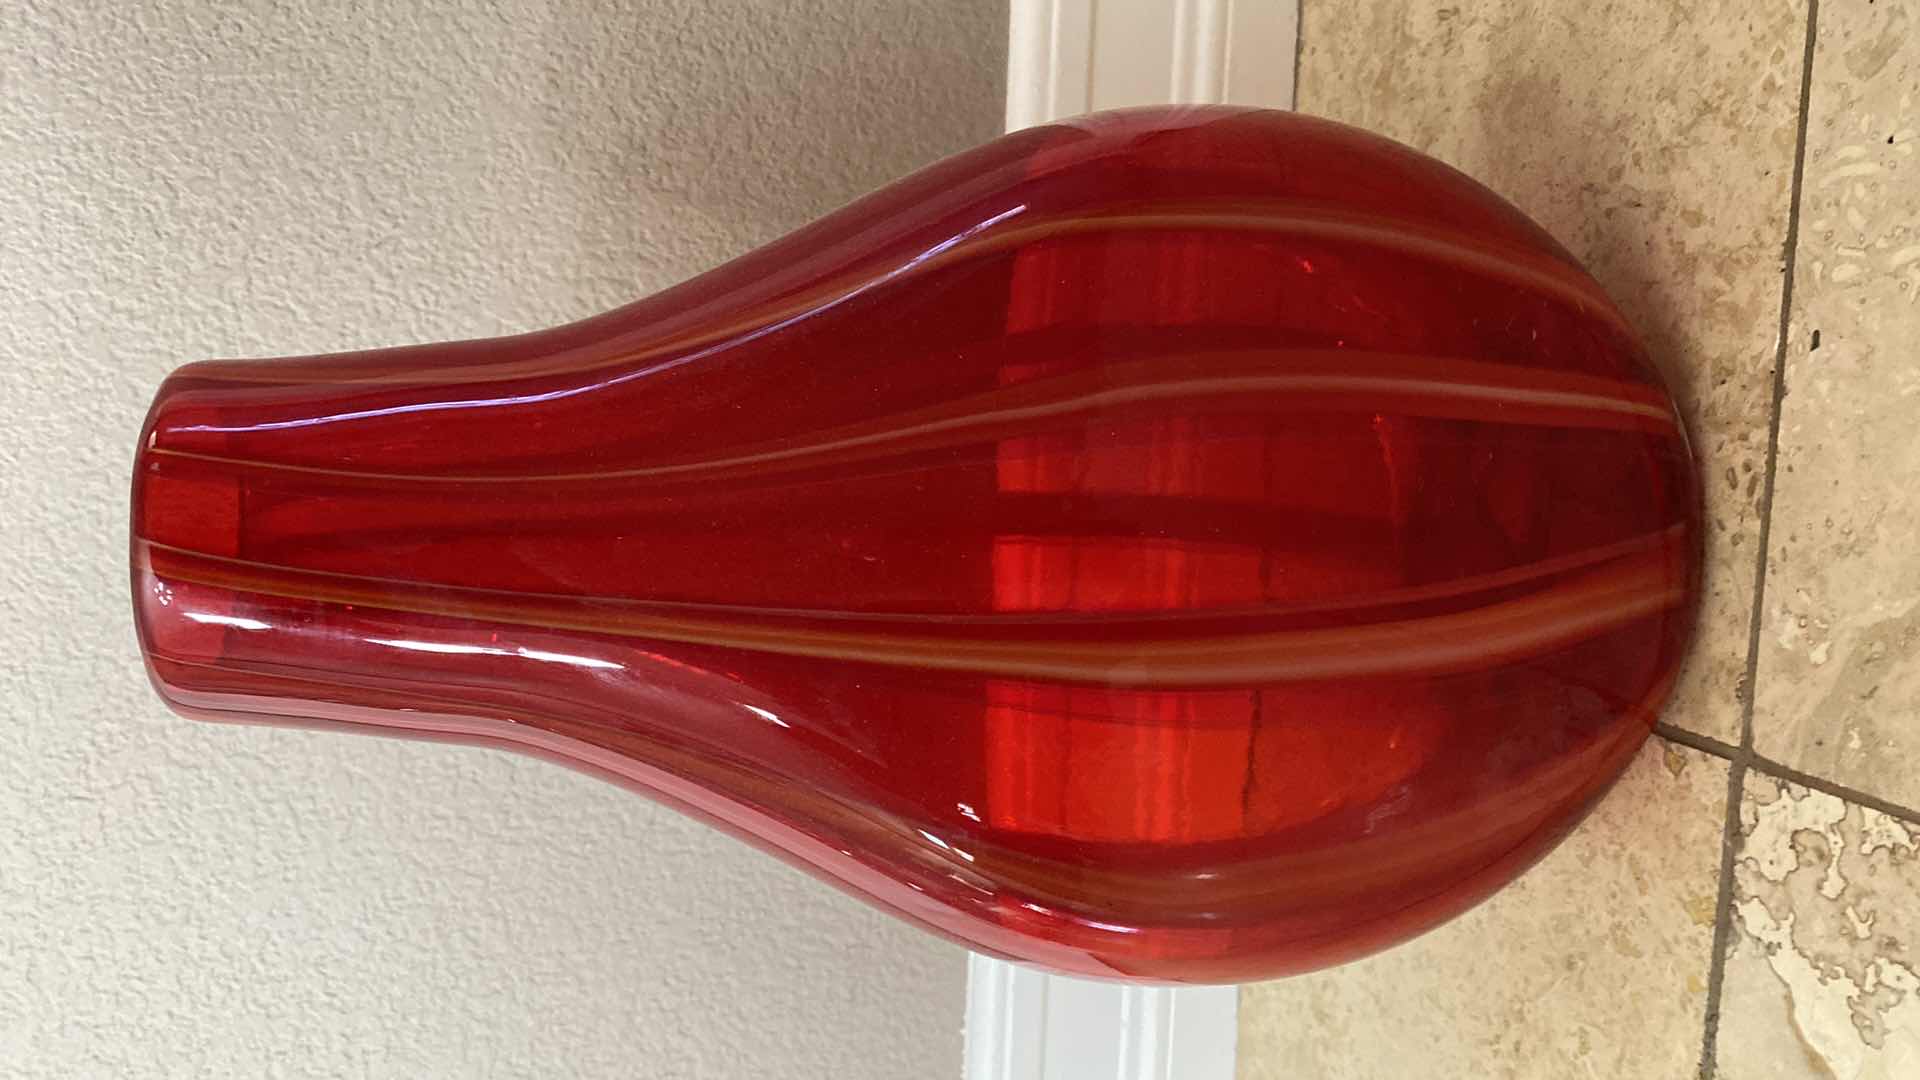 Photo 2 of RED ART GLASS VASE 8 1/2” x 14”